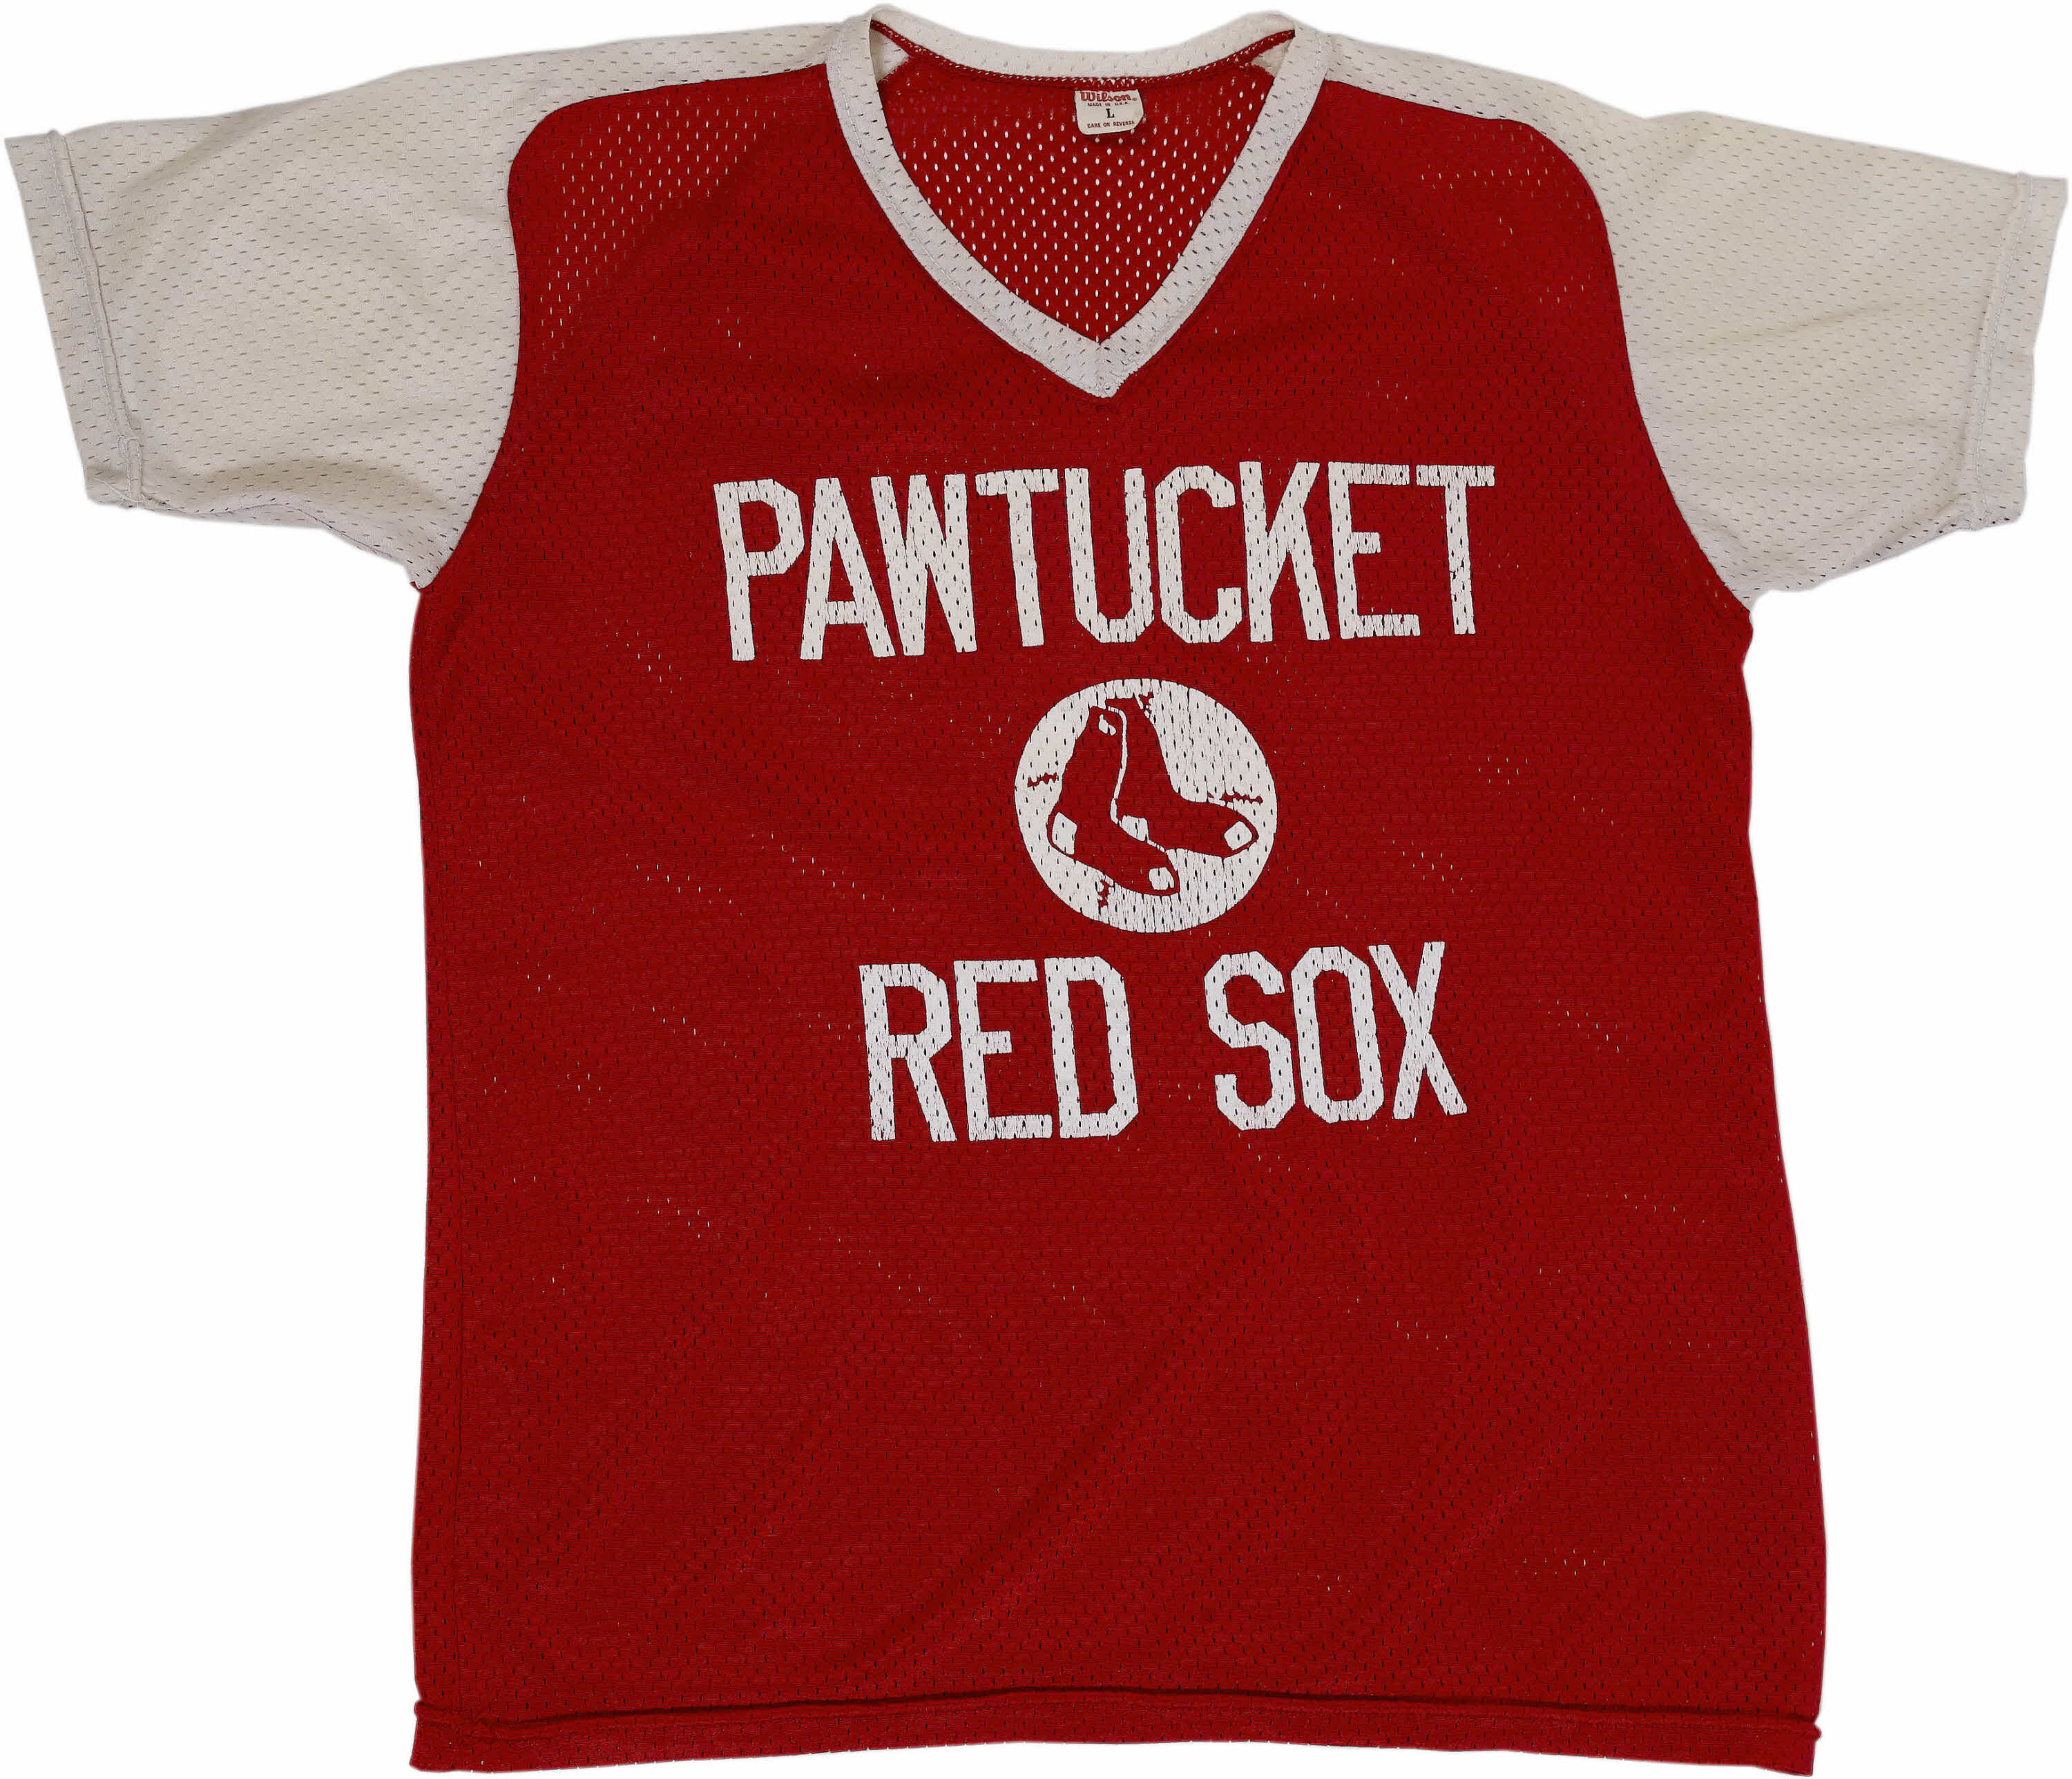 Early 1980's Pawtucket Red Sox Game Worn Jersey Attributed to Wade